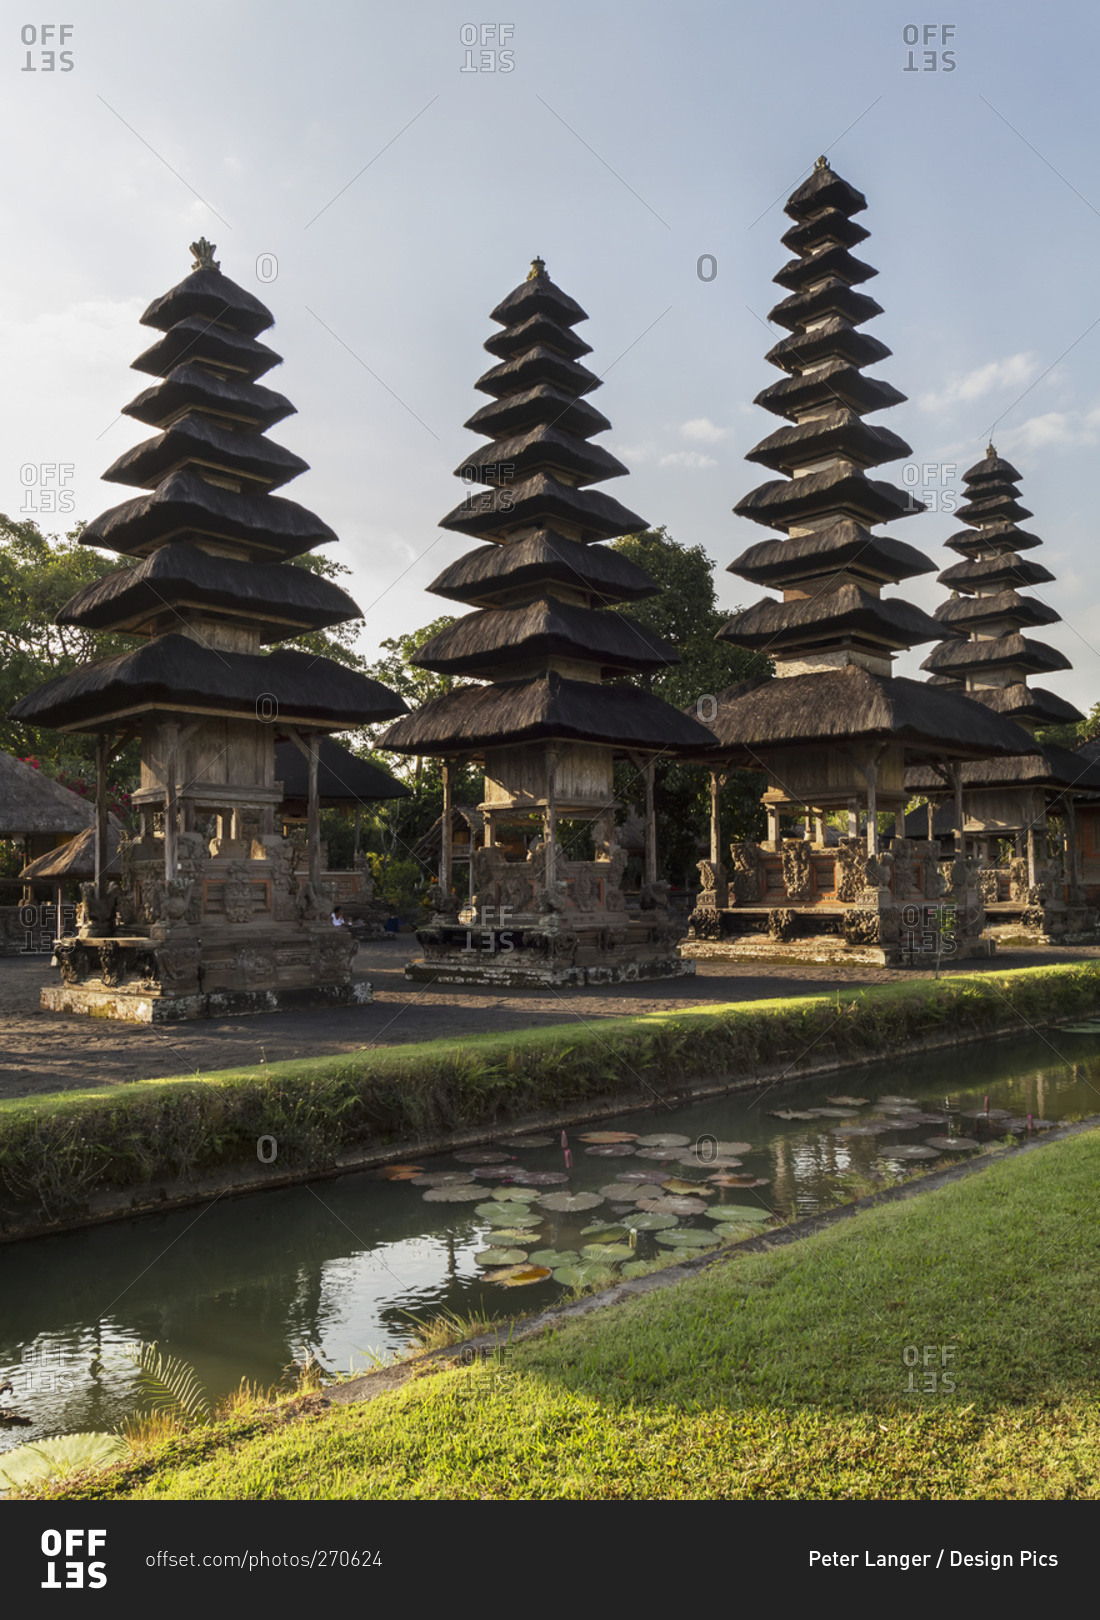 Moat surrounding classical tiered thatched-roofs merus (towers) in the Royal Water Temple Pura Taman Ayun, Mengwi, Bali, Indonesia